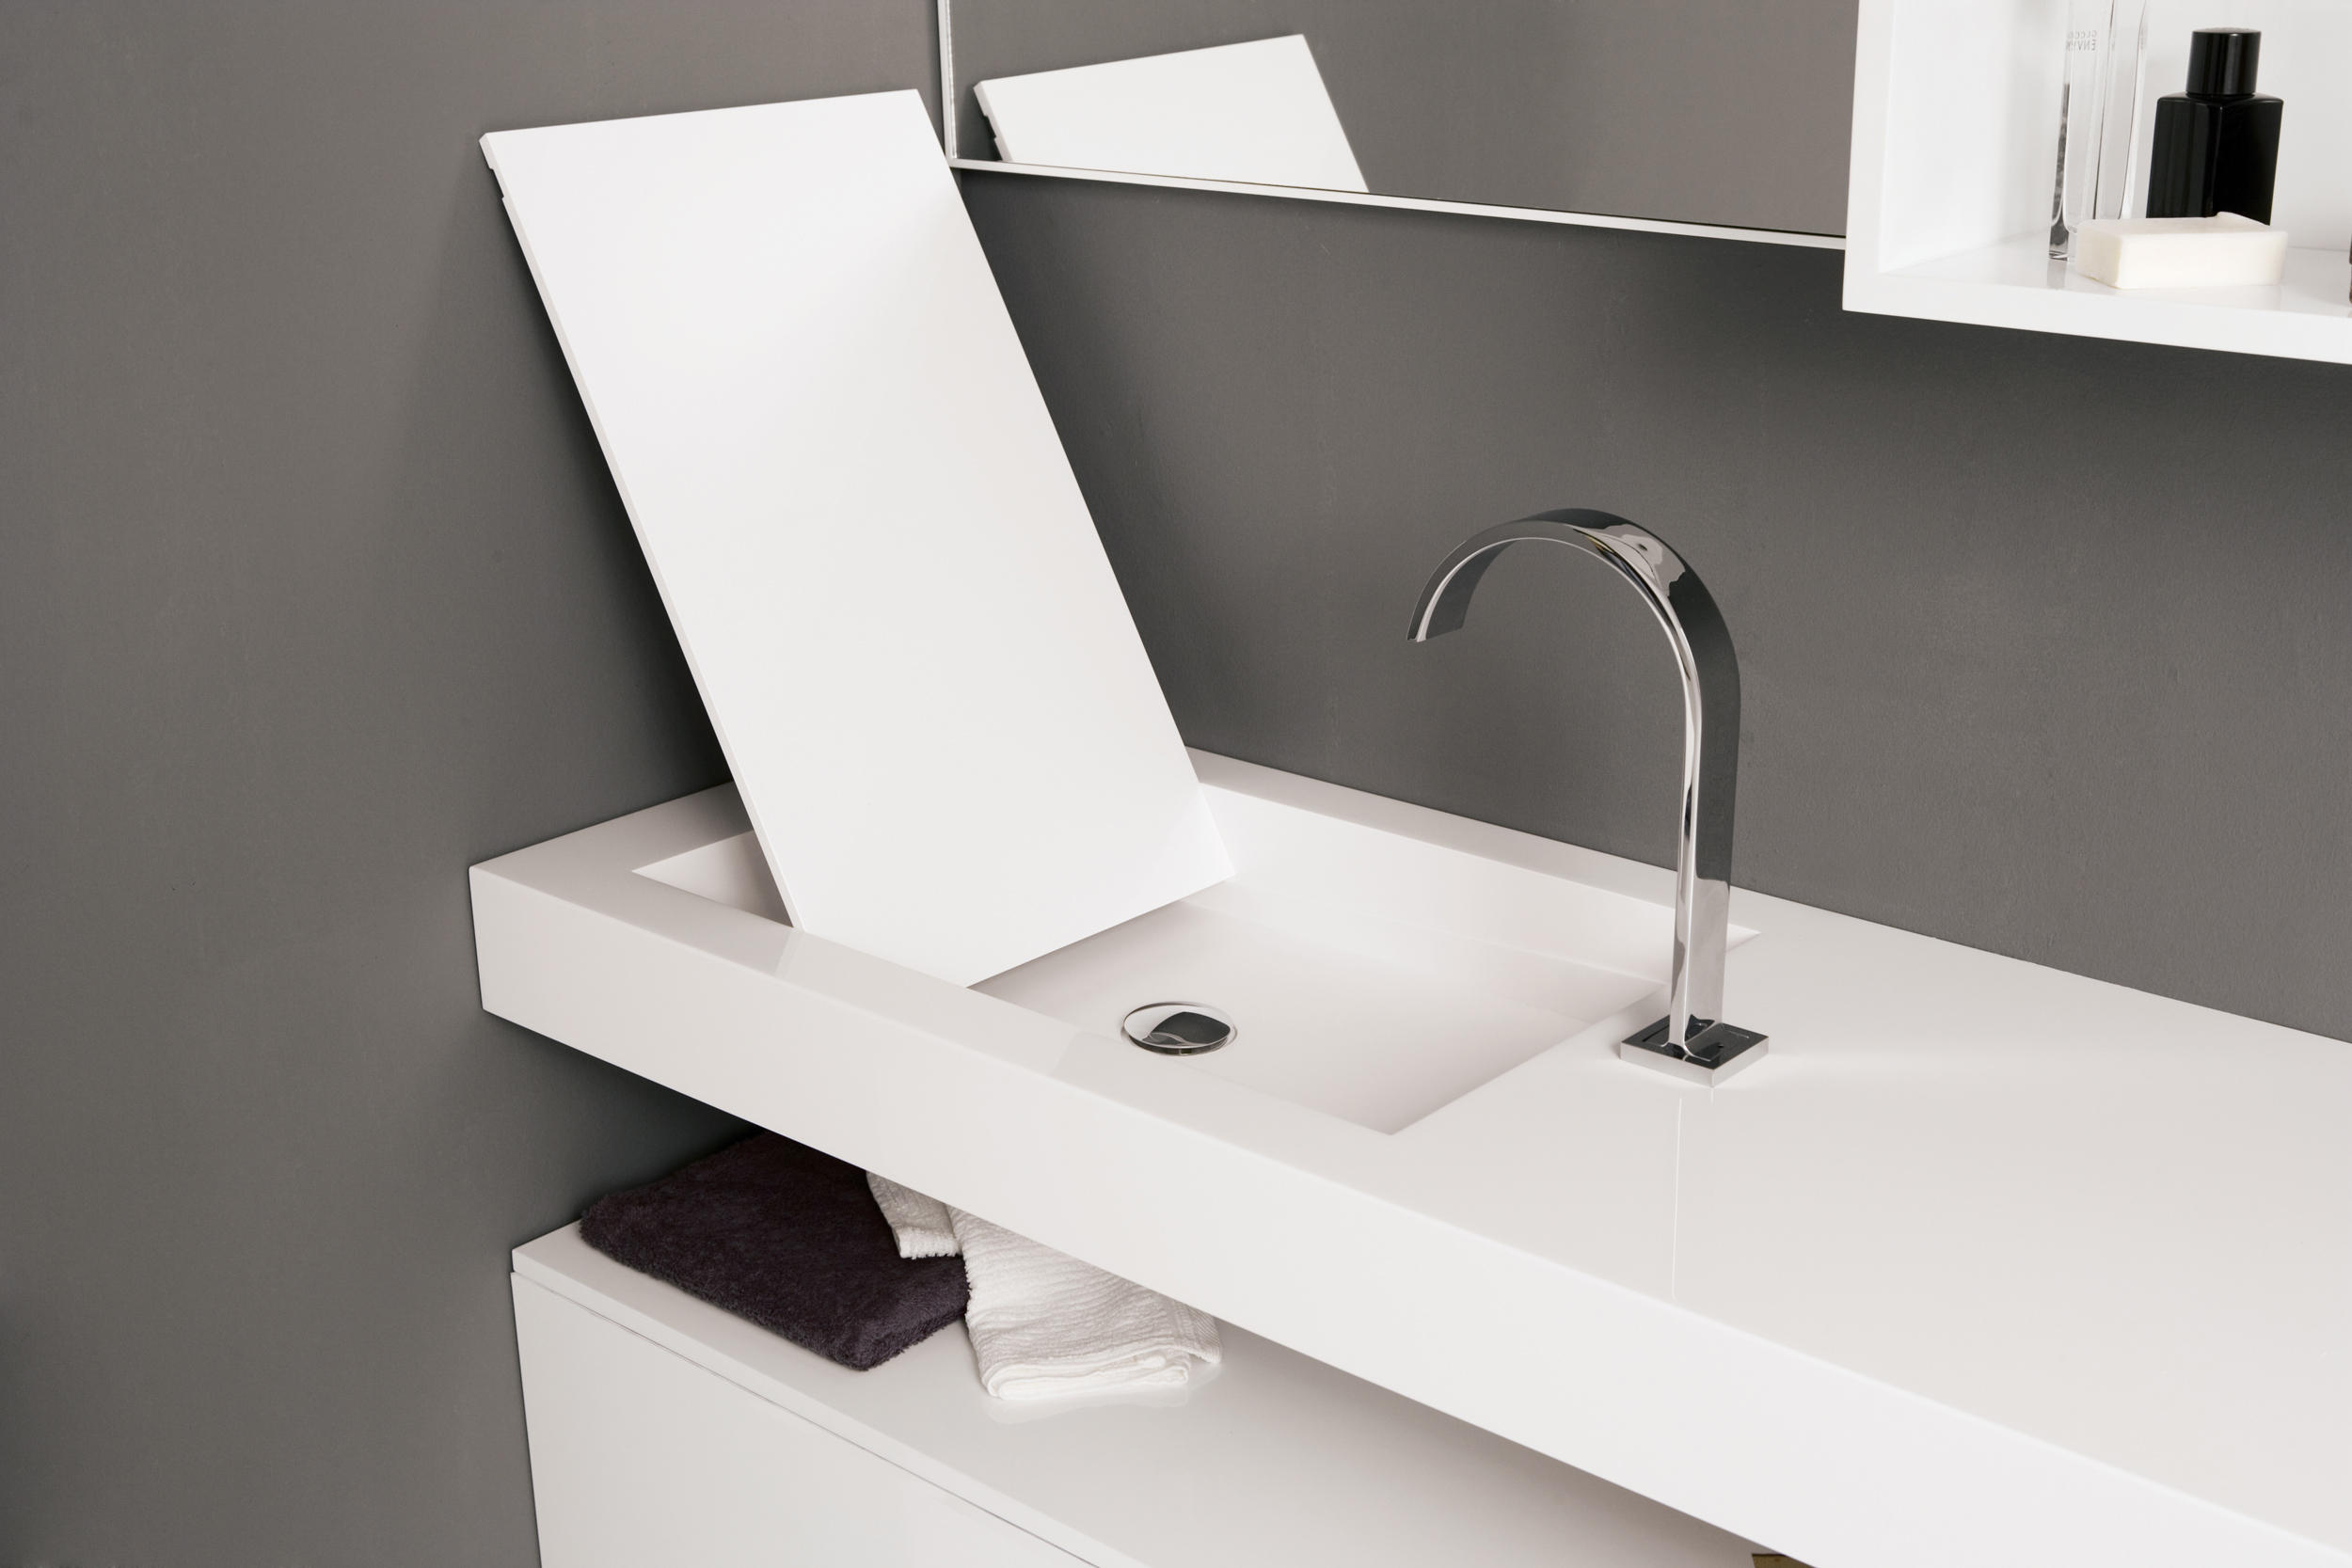 Different Types of Wash Basins You Can Install in Your House